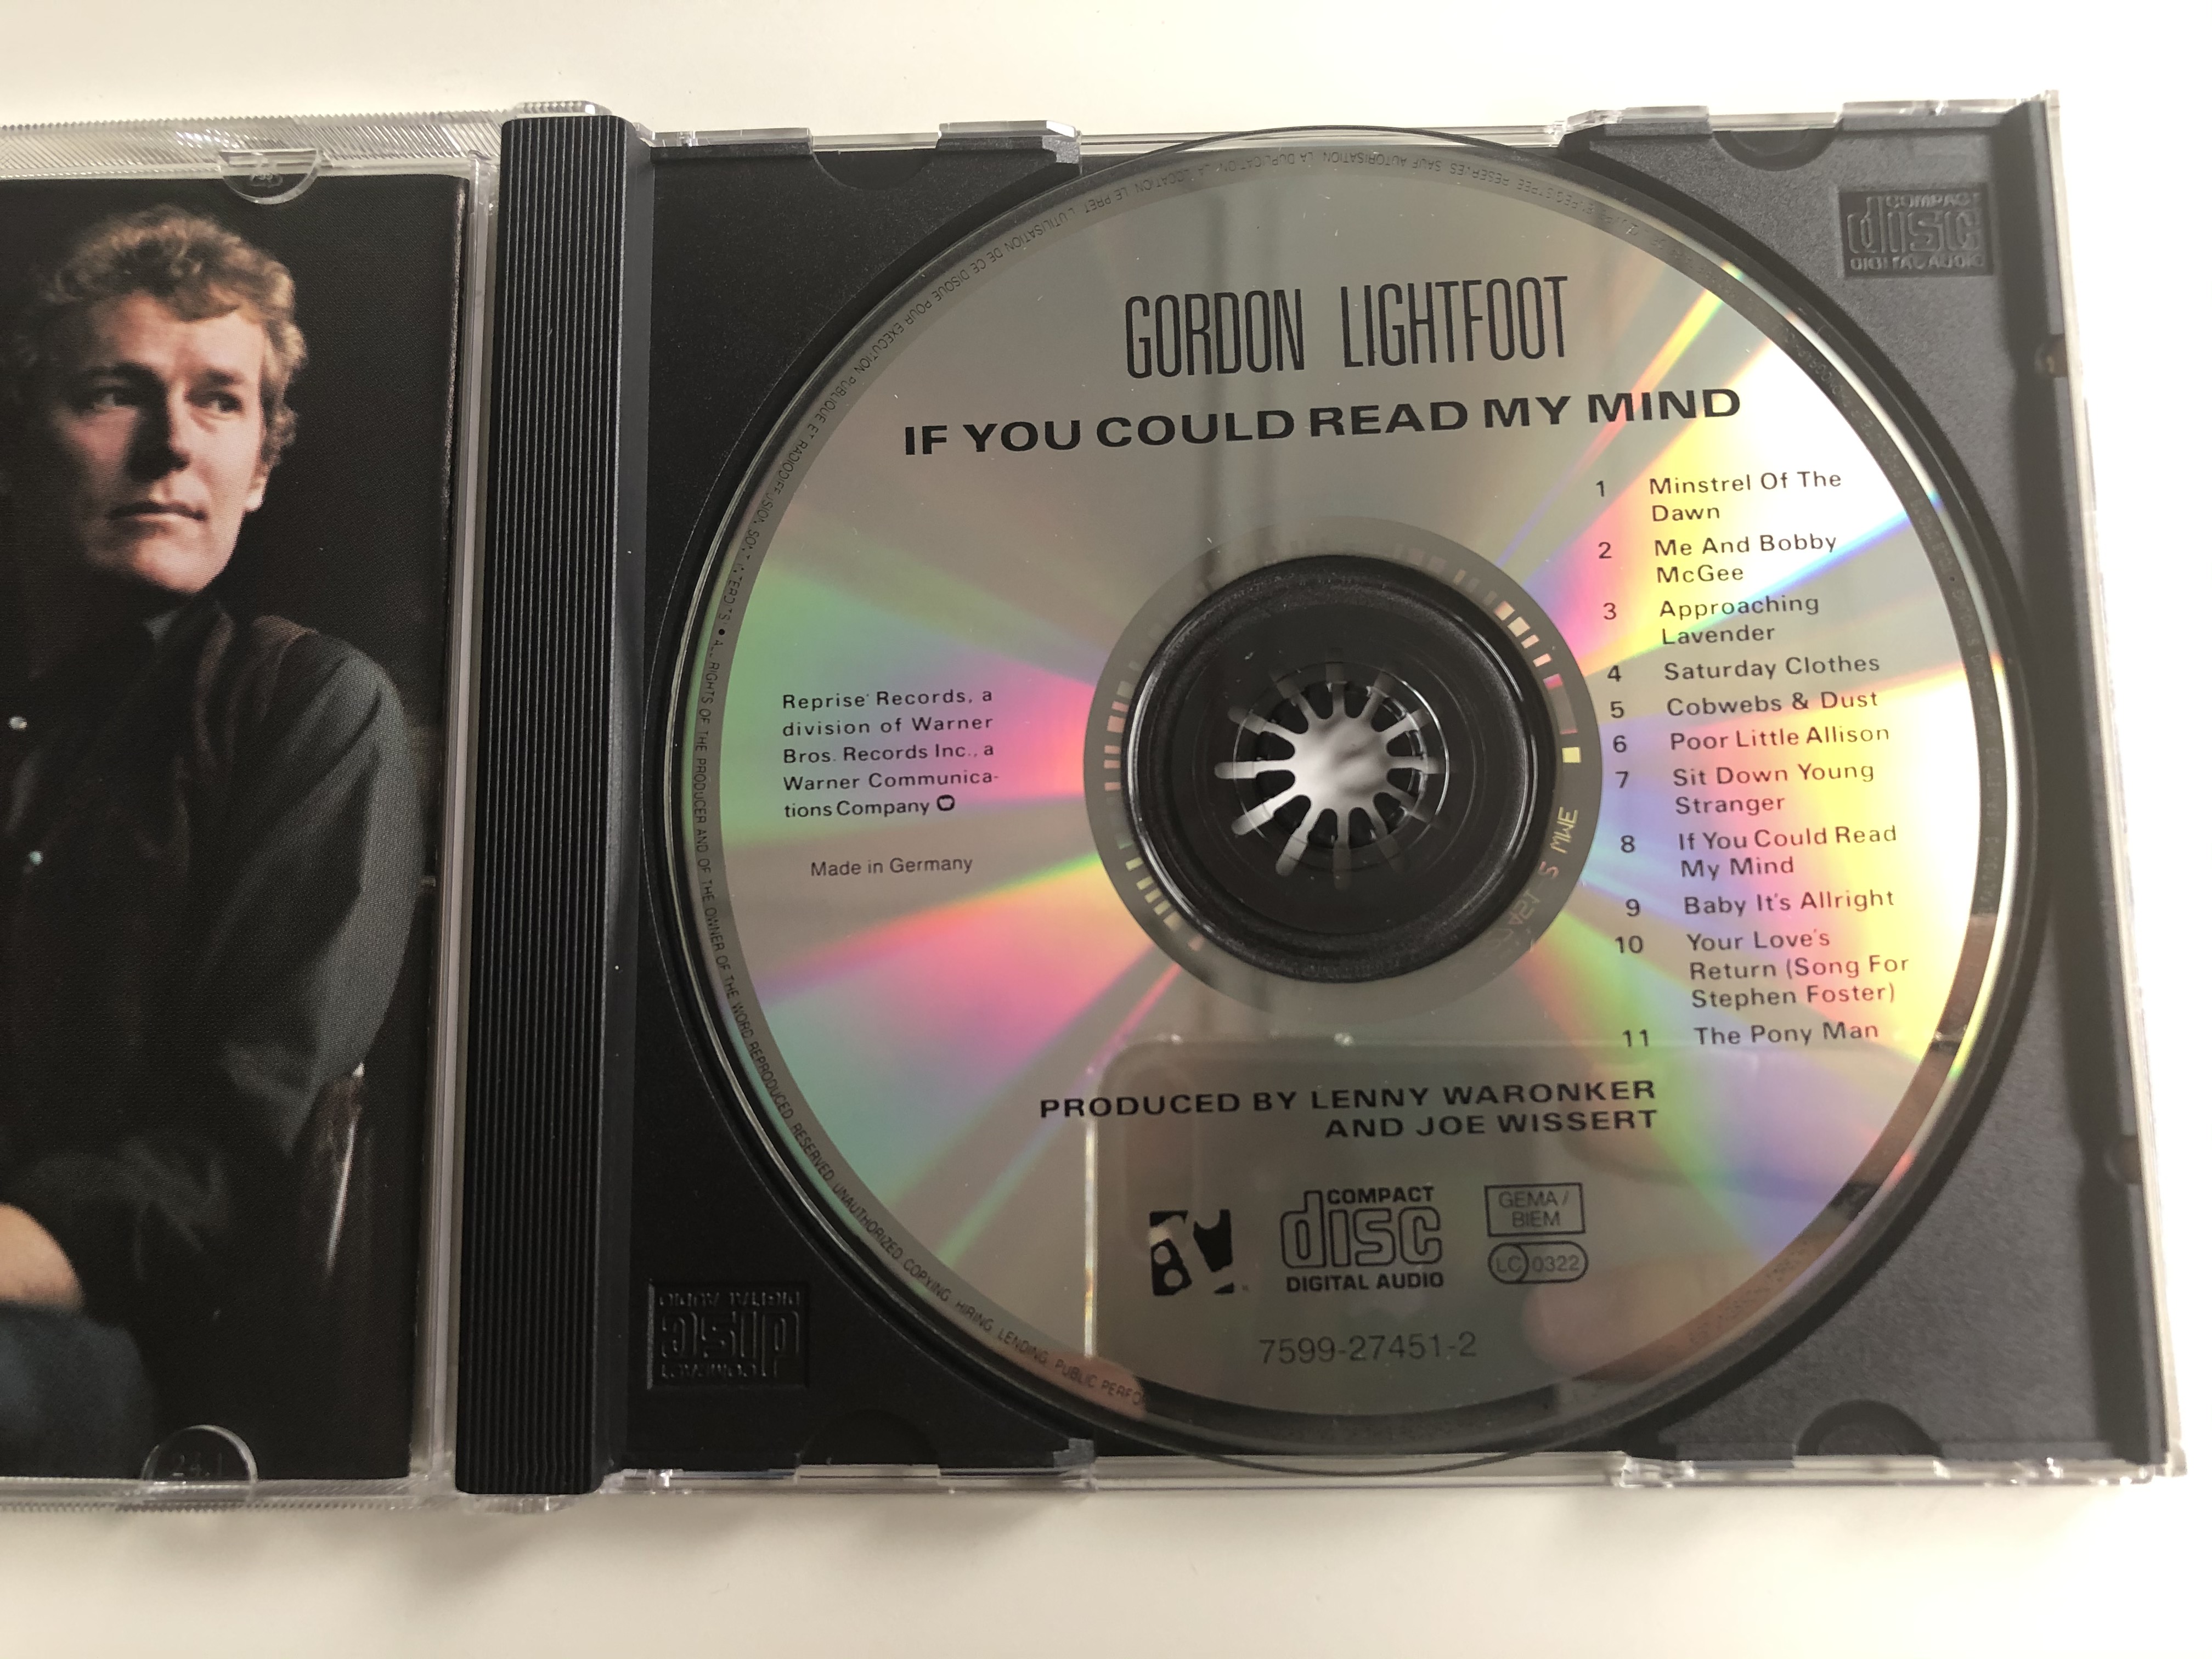 gordon-lightfoot-if-you-could-read-my-mind-reprise-records-audio-cd-7599-27451-2-4-.jpg